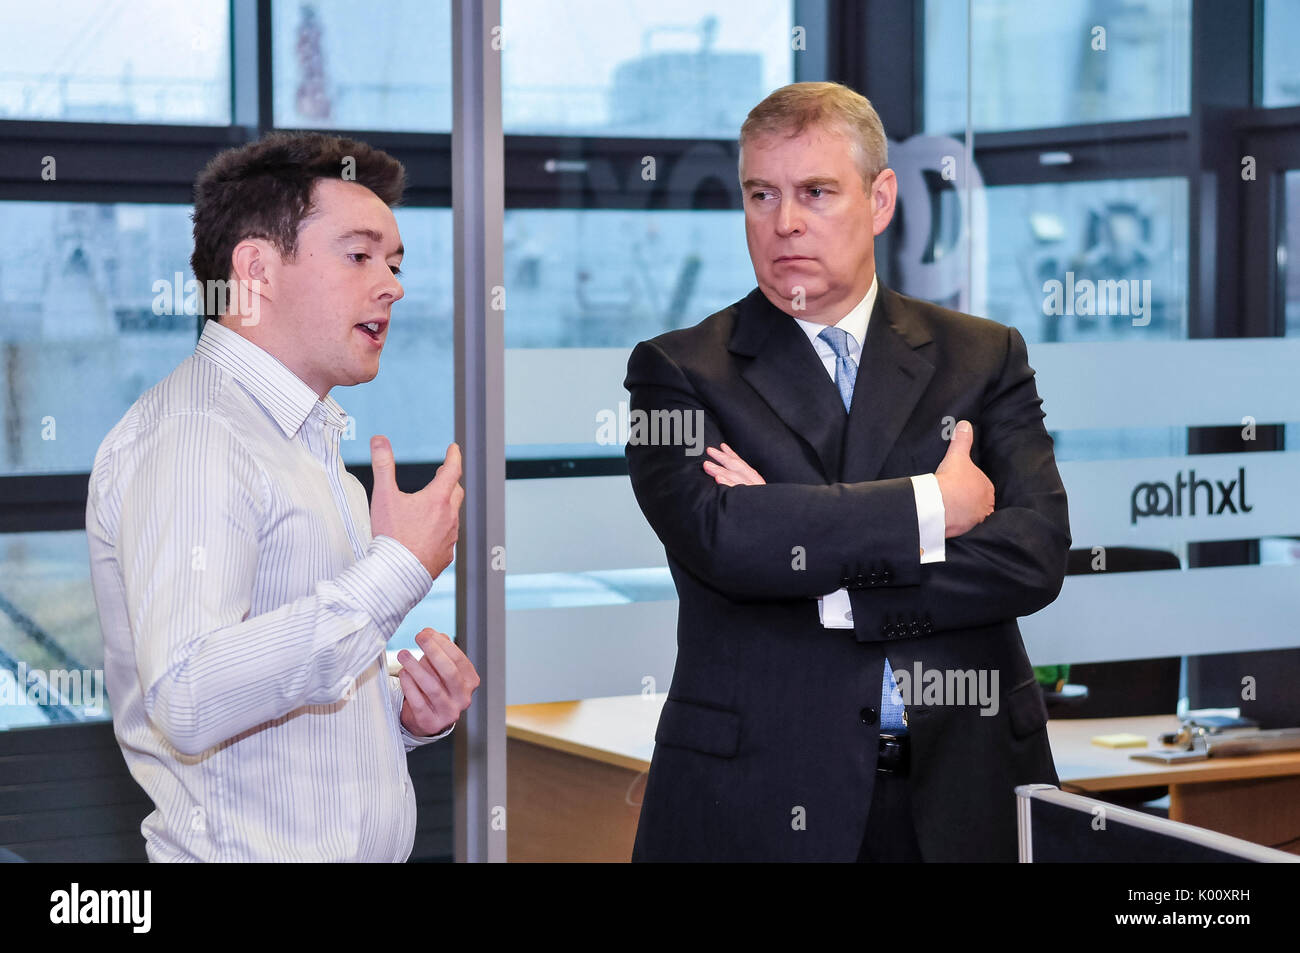 29th January 2013, Belfast, Northern Ireland. Prince Andrew, the Duke of York, stands with his arms folded and a stern face while in conversation with a software engineer at the Northern Ireland Science Park Stock Photo